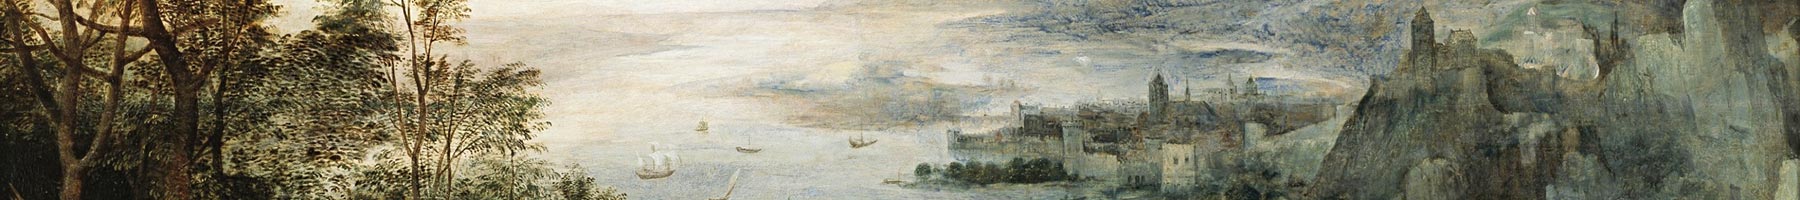 landscape painting of towns and castles along a shore